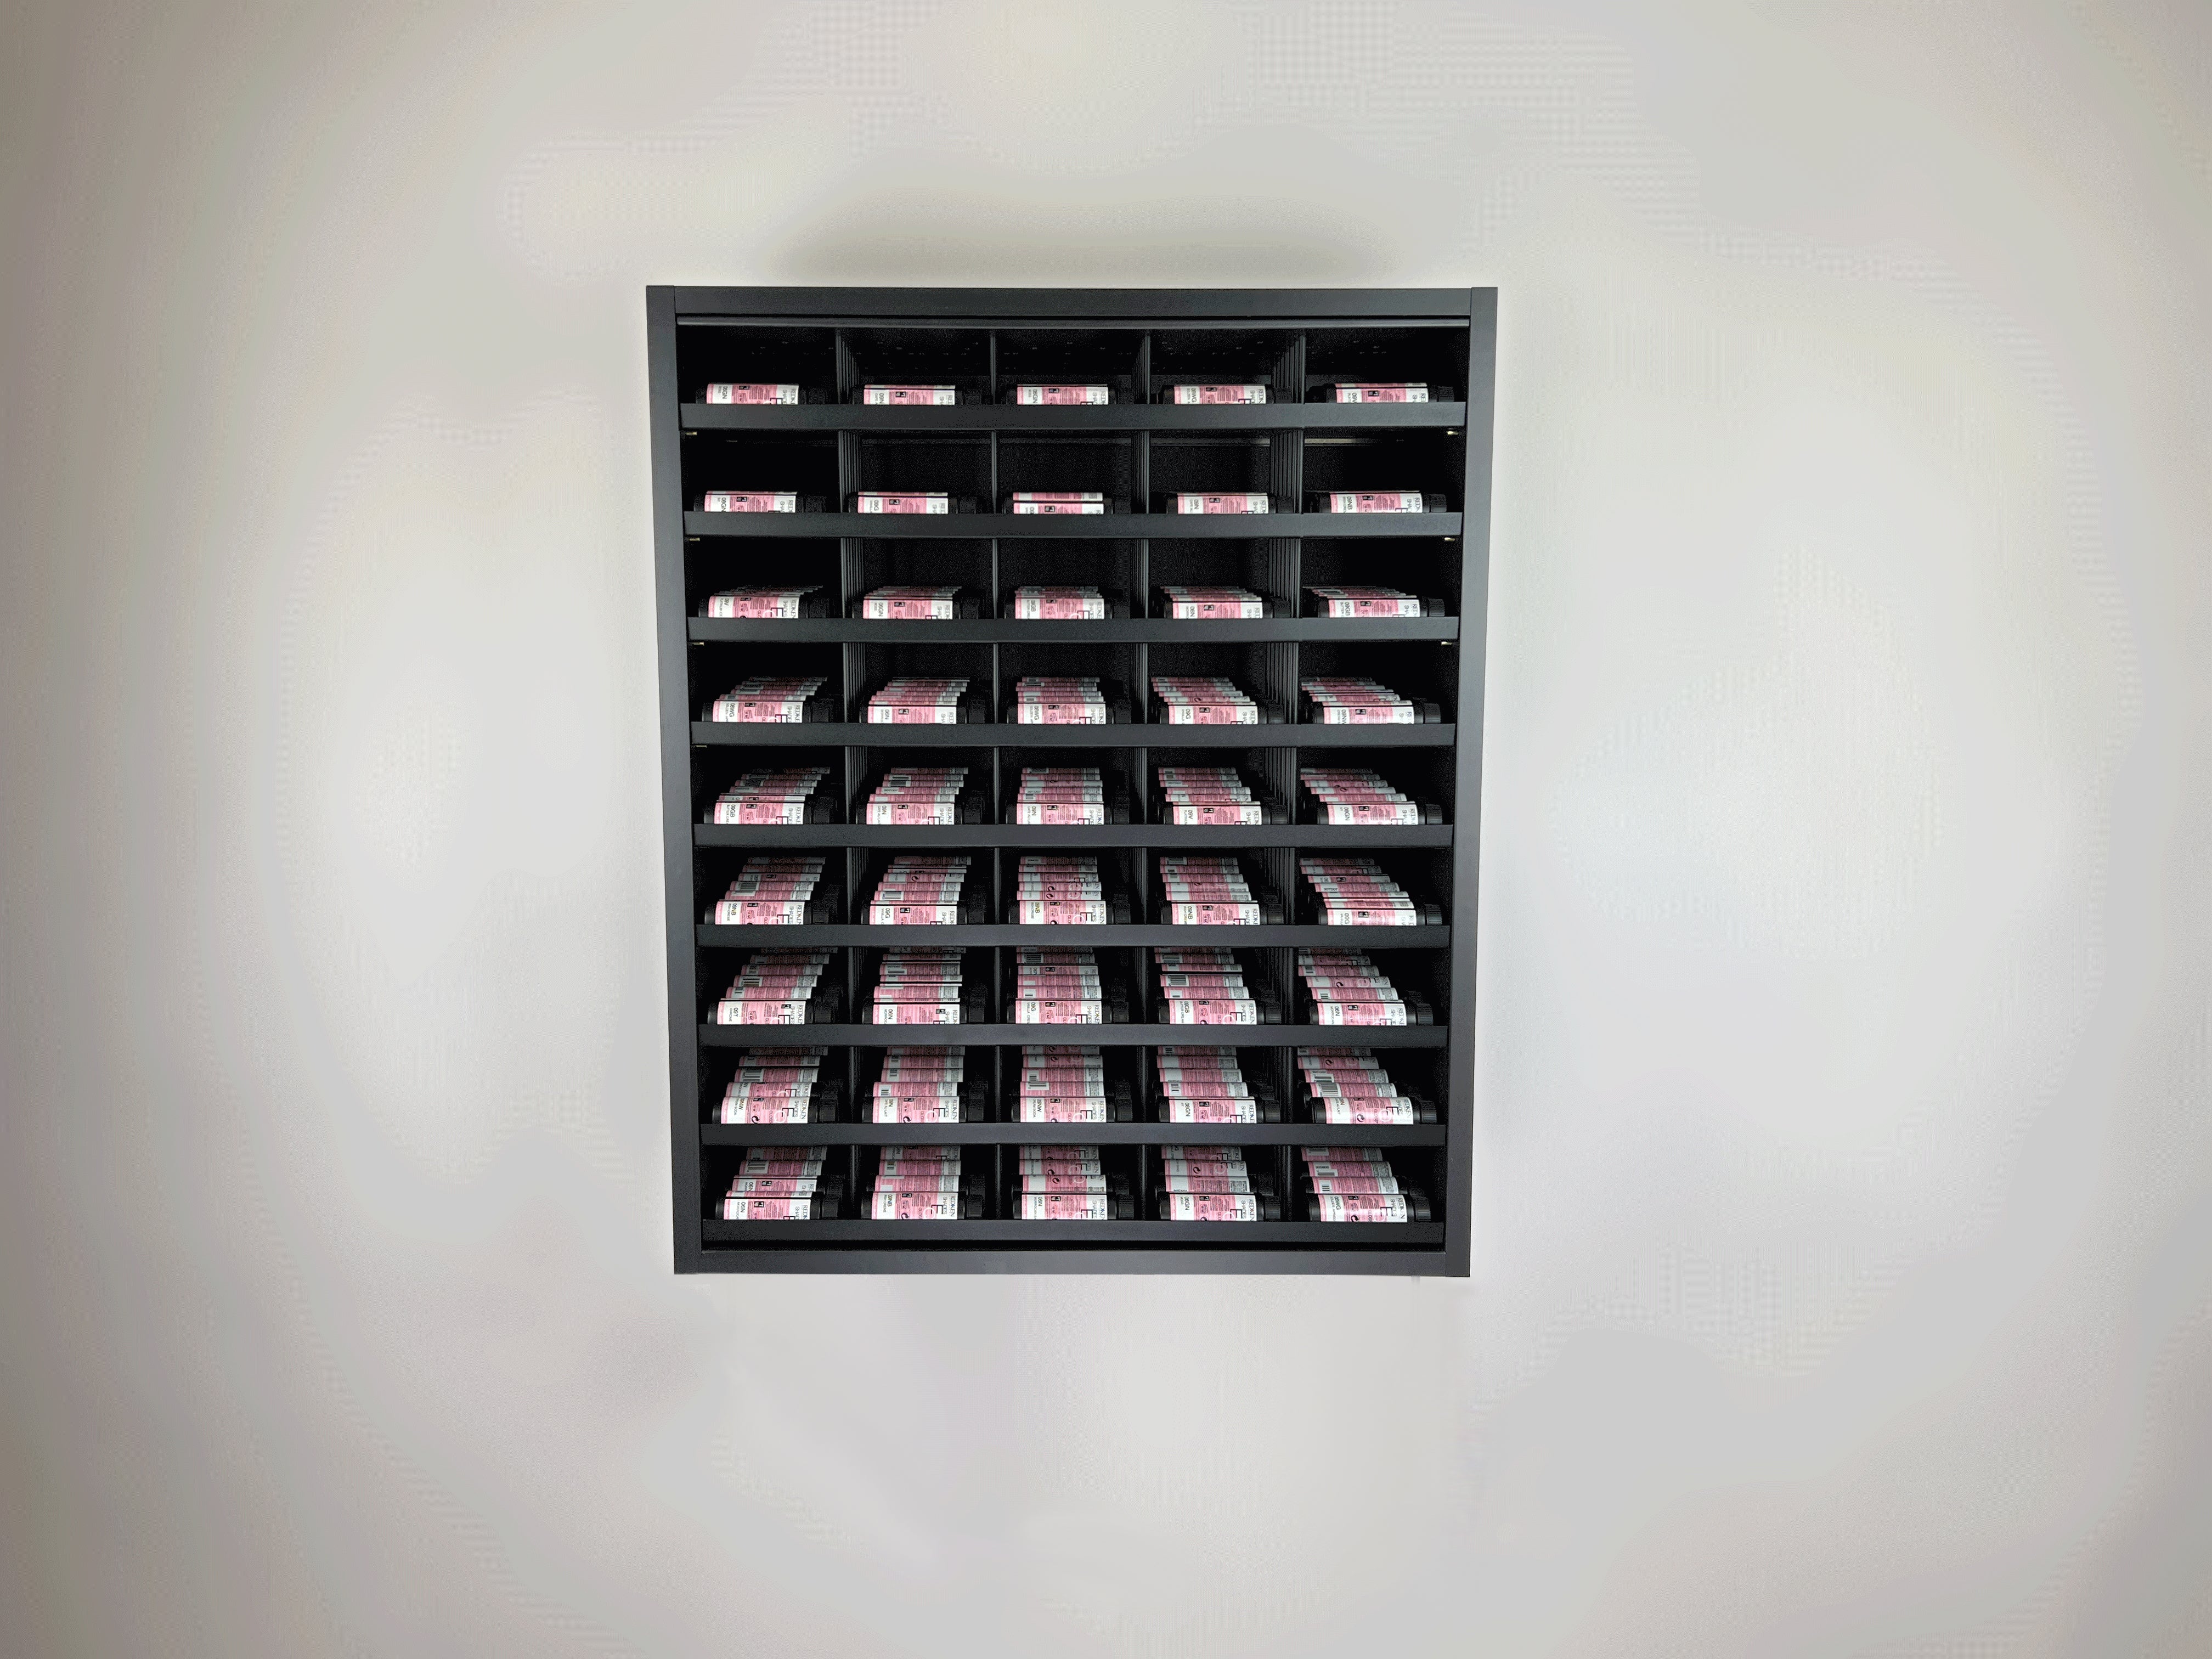 Super Matte Black Modular Hair Color Organizer with powder coated aluminum shelves by Dyerector organizing Redken Shades EQ hair color